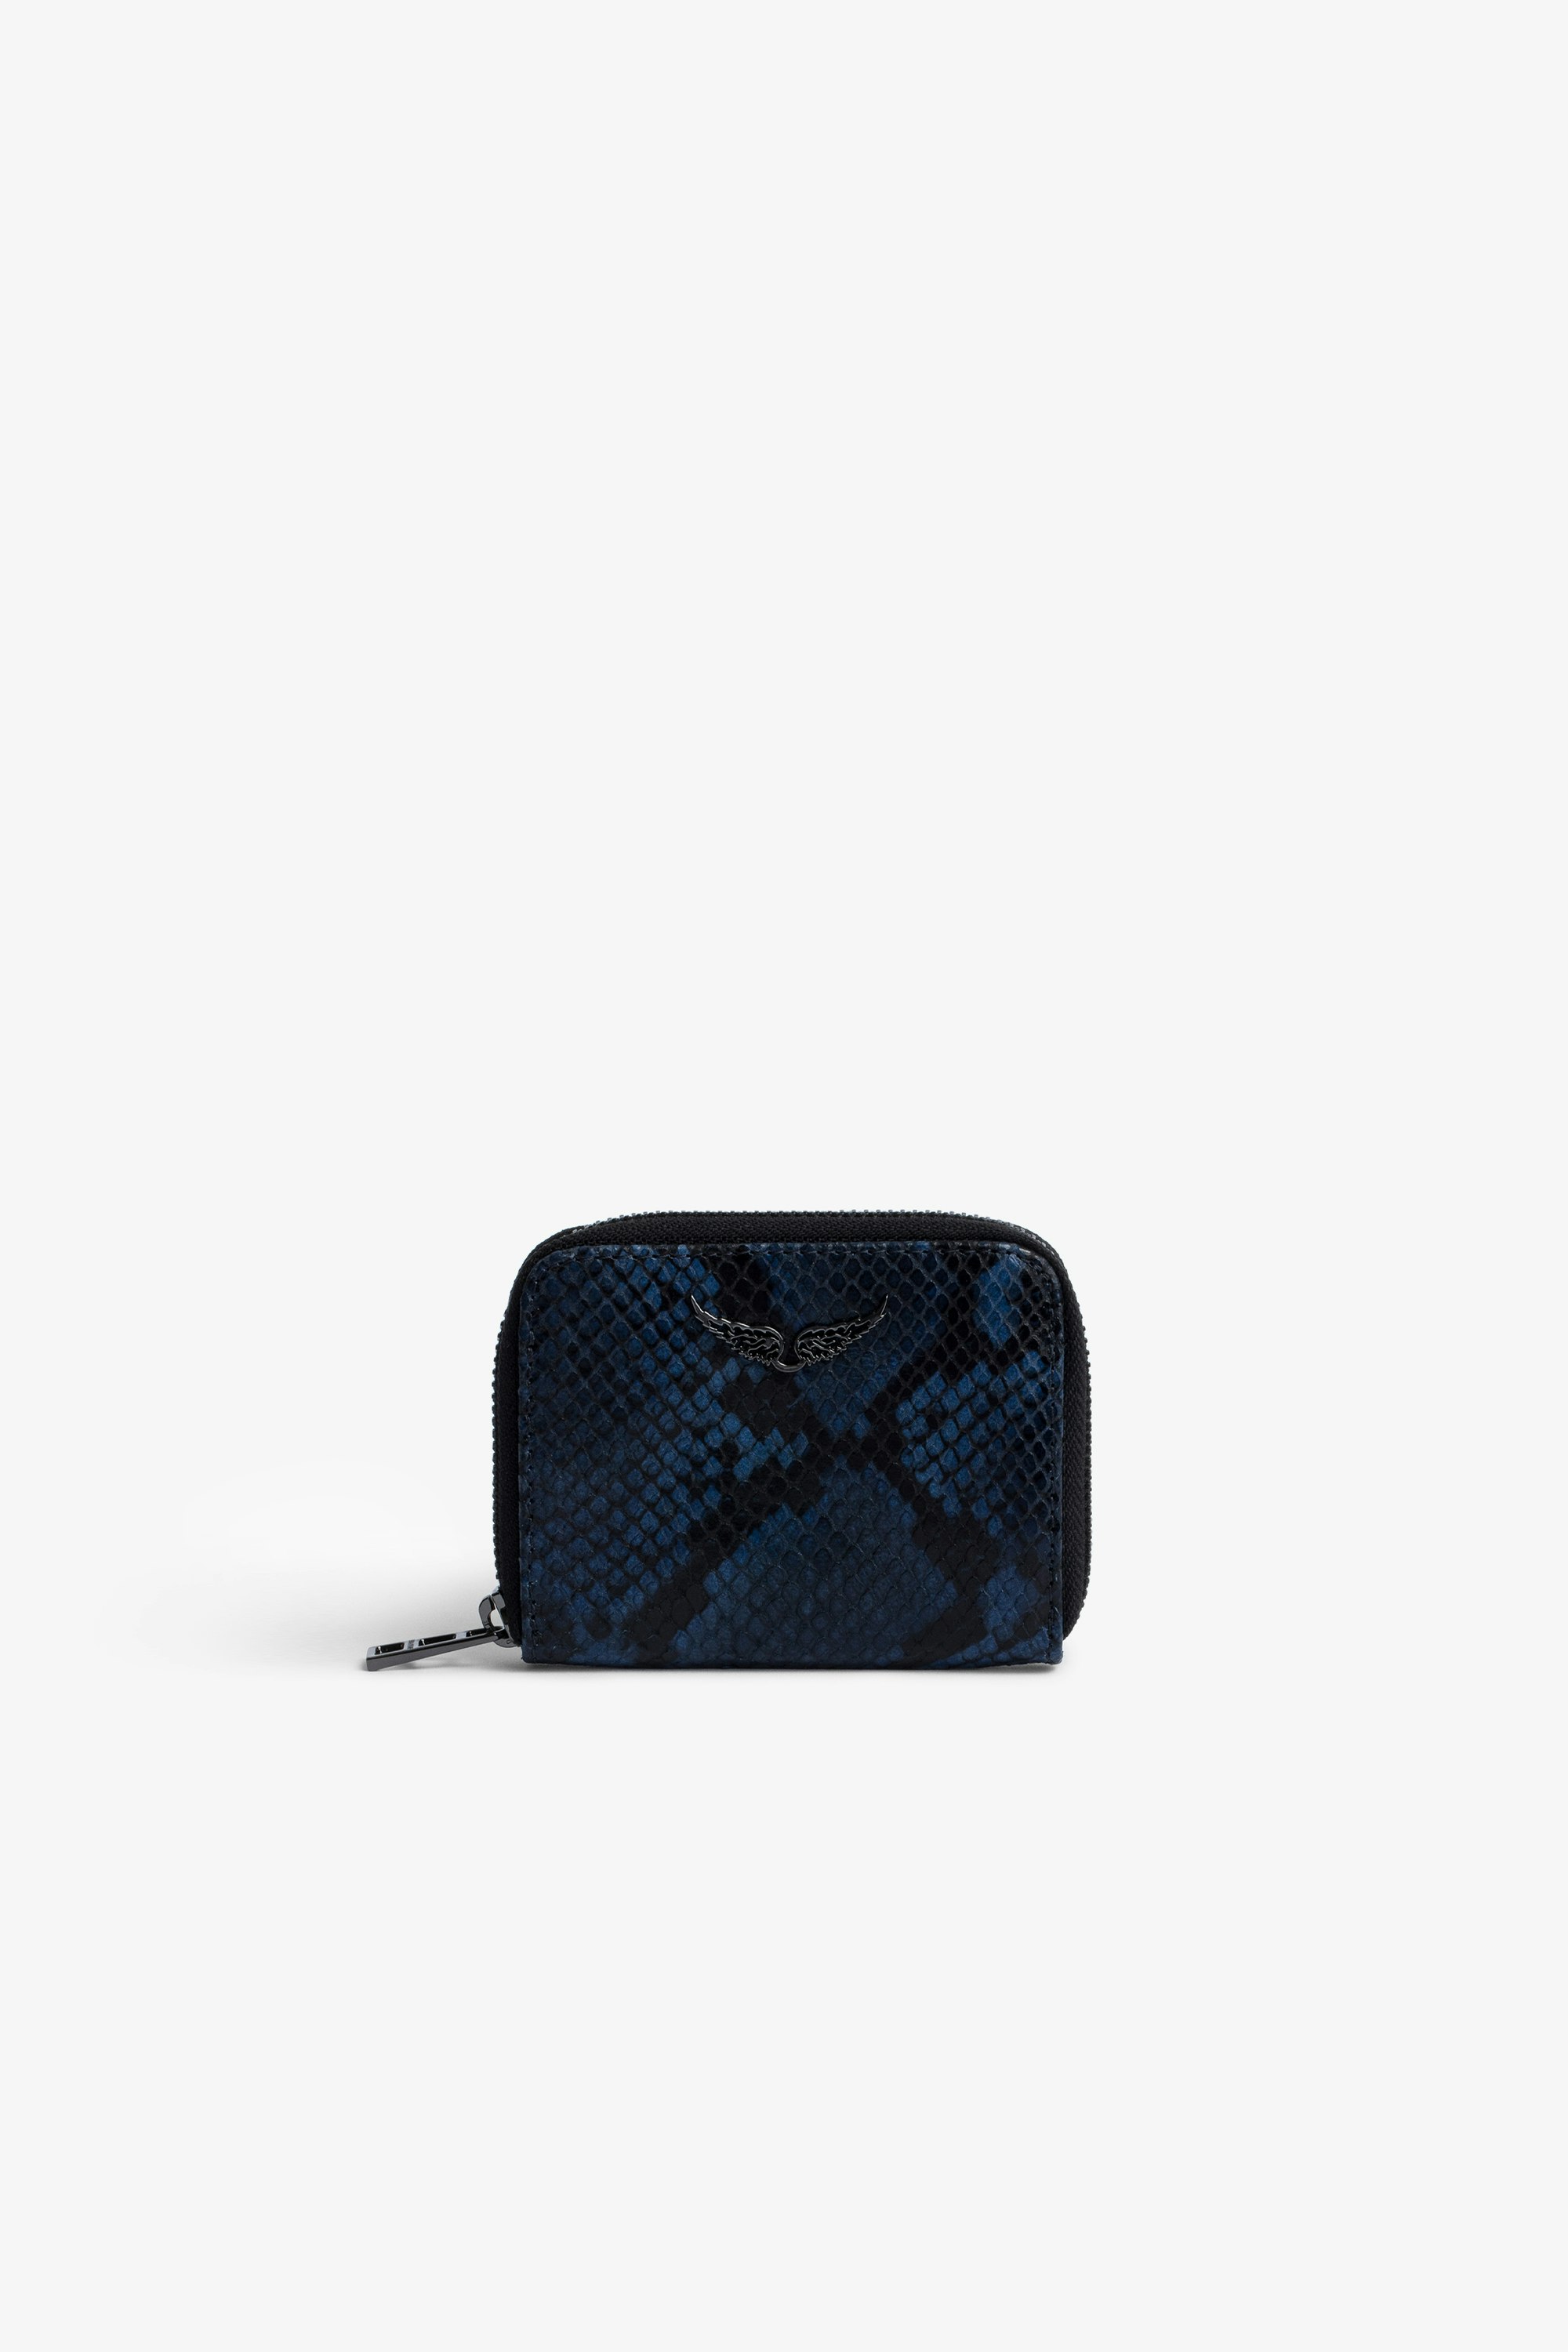 Mini ZV Wallet Women’s black and blue python-effect leather coin purse